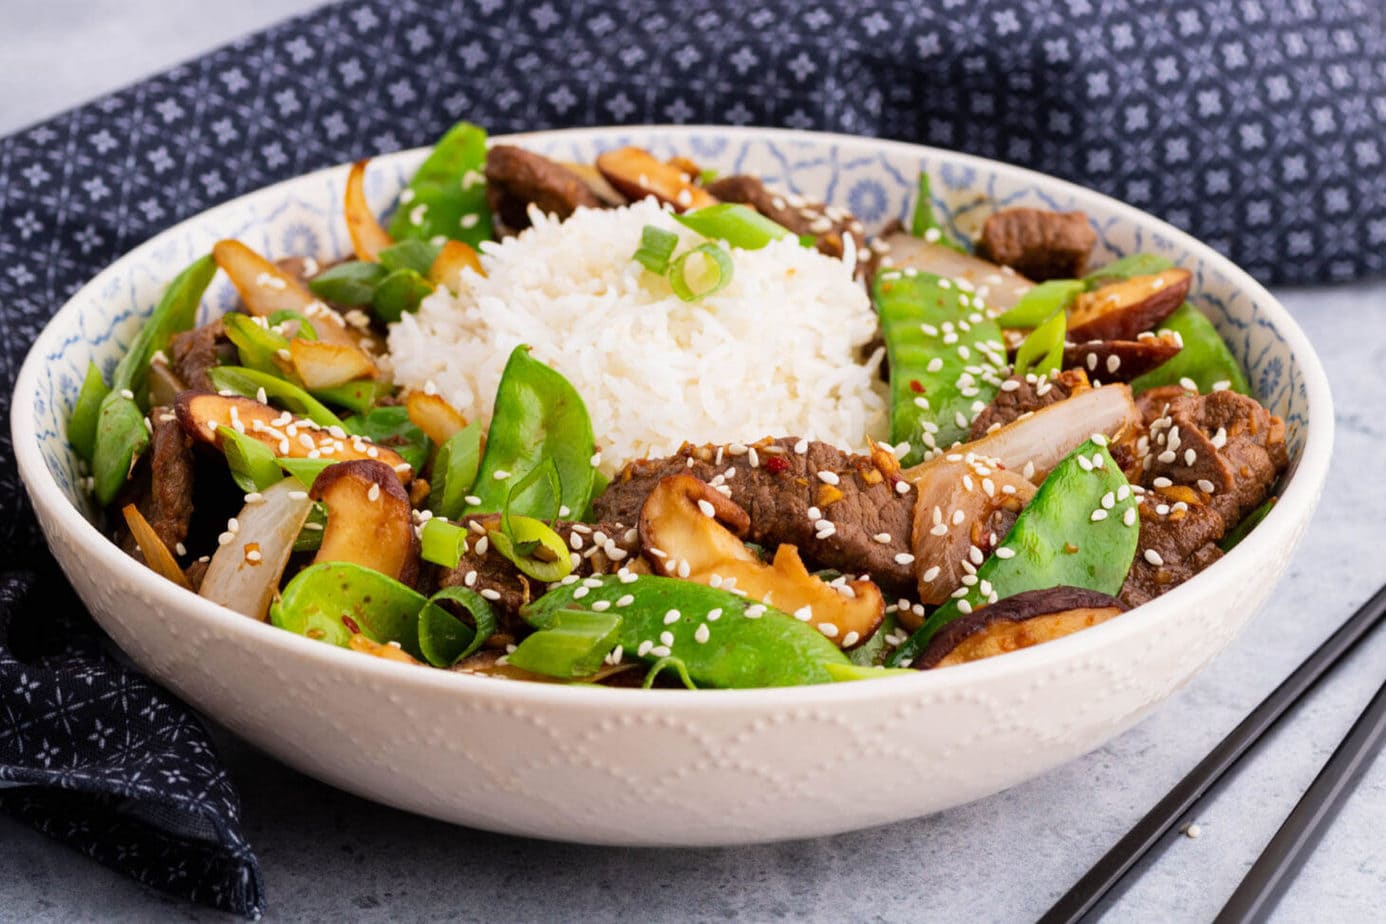 A bowl filled with beef stir fry and snow peas, white rice, shiitake mushrooms topped with sesame seeds and sliced green onions.